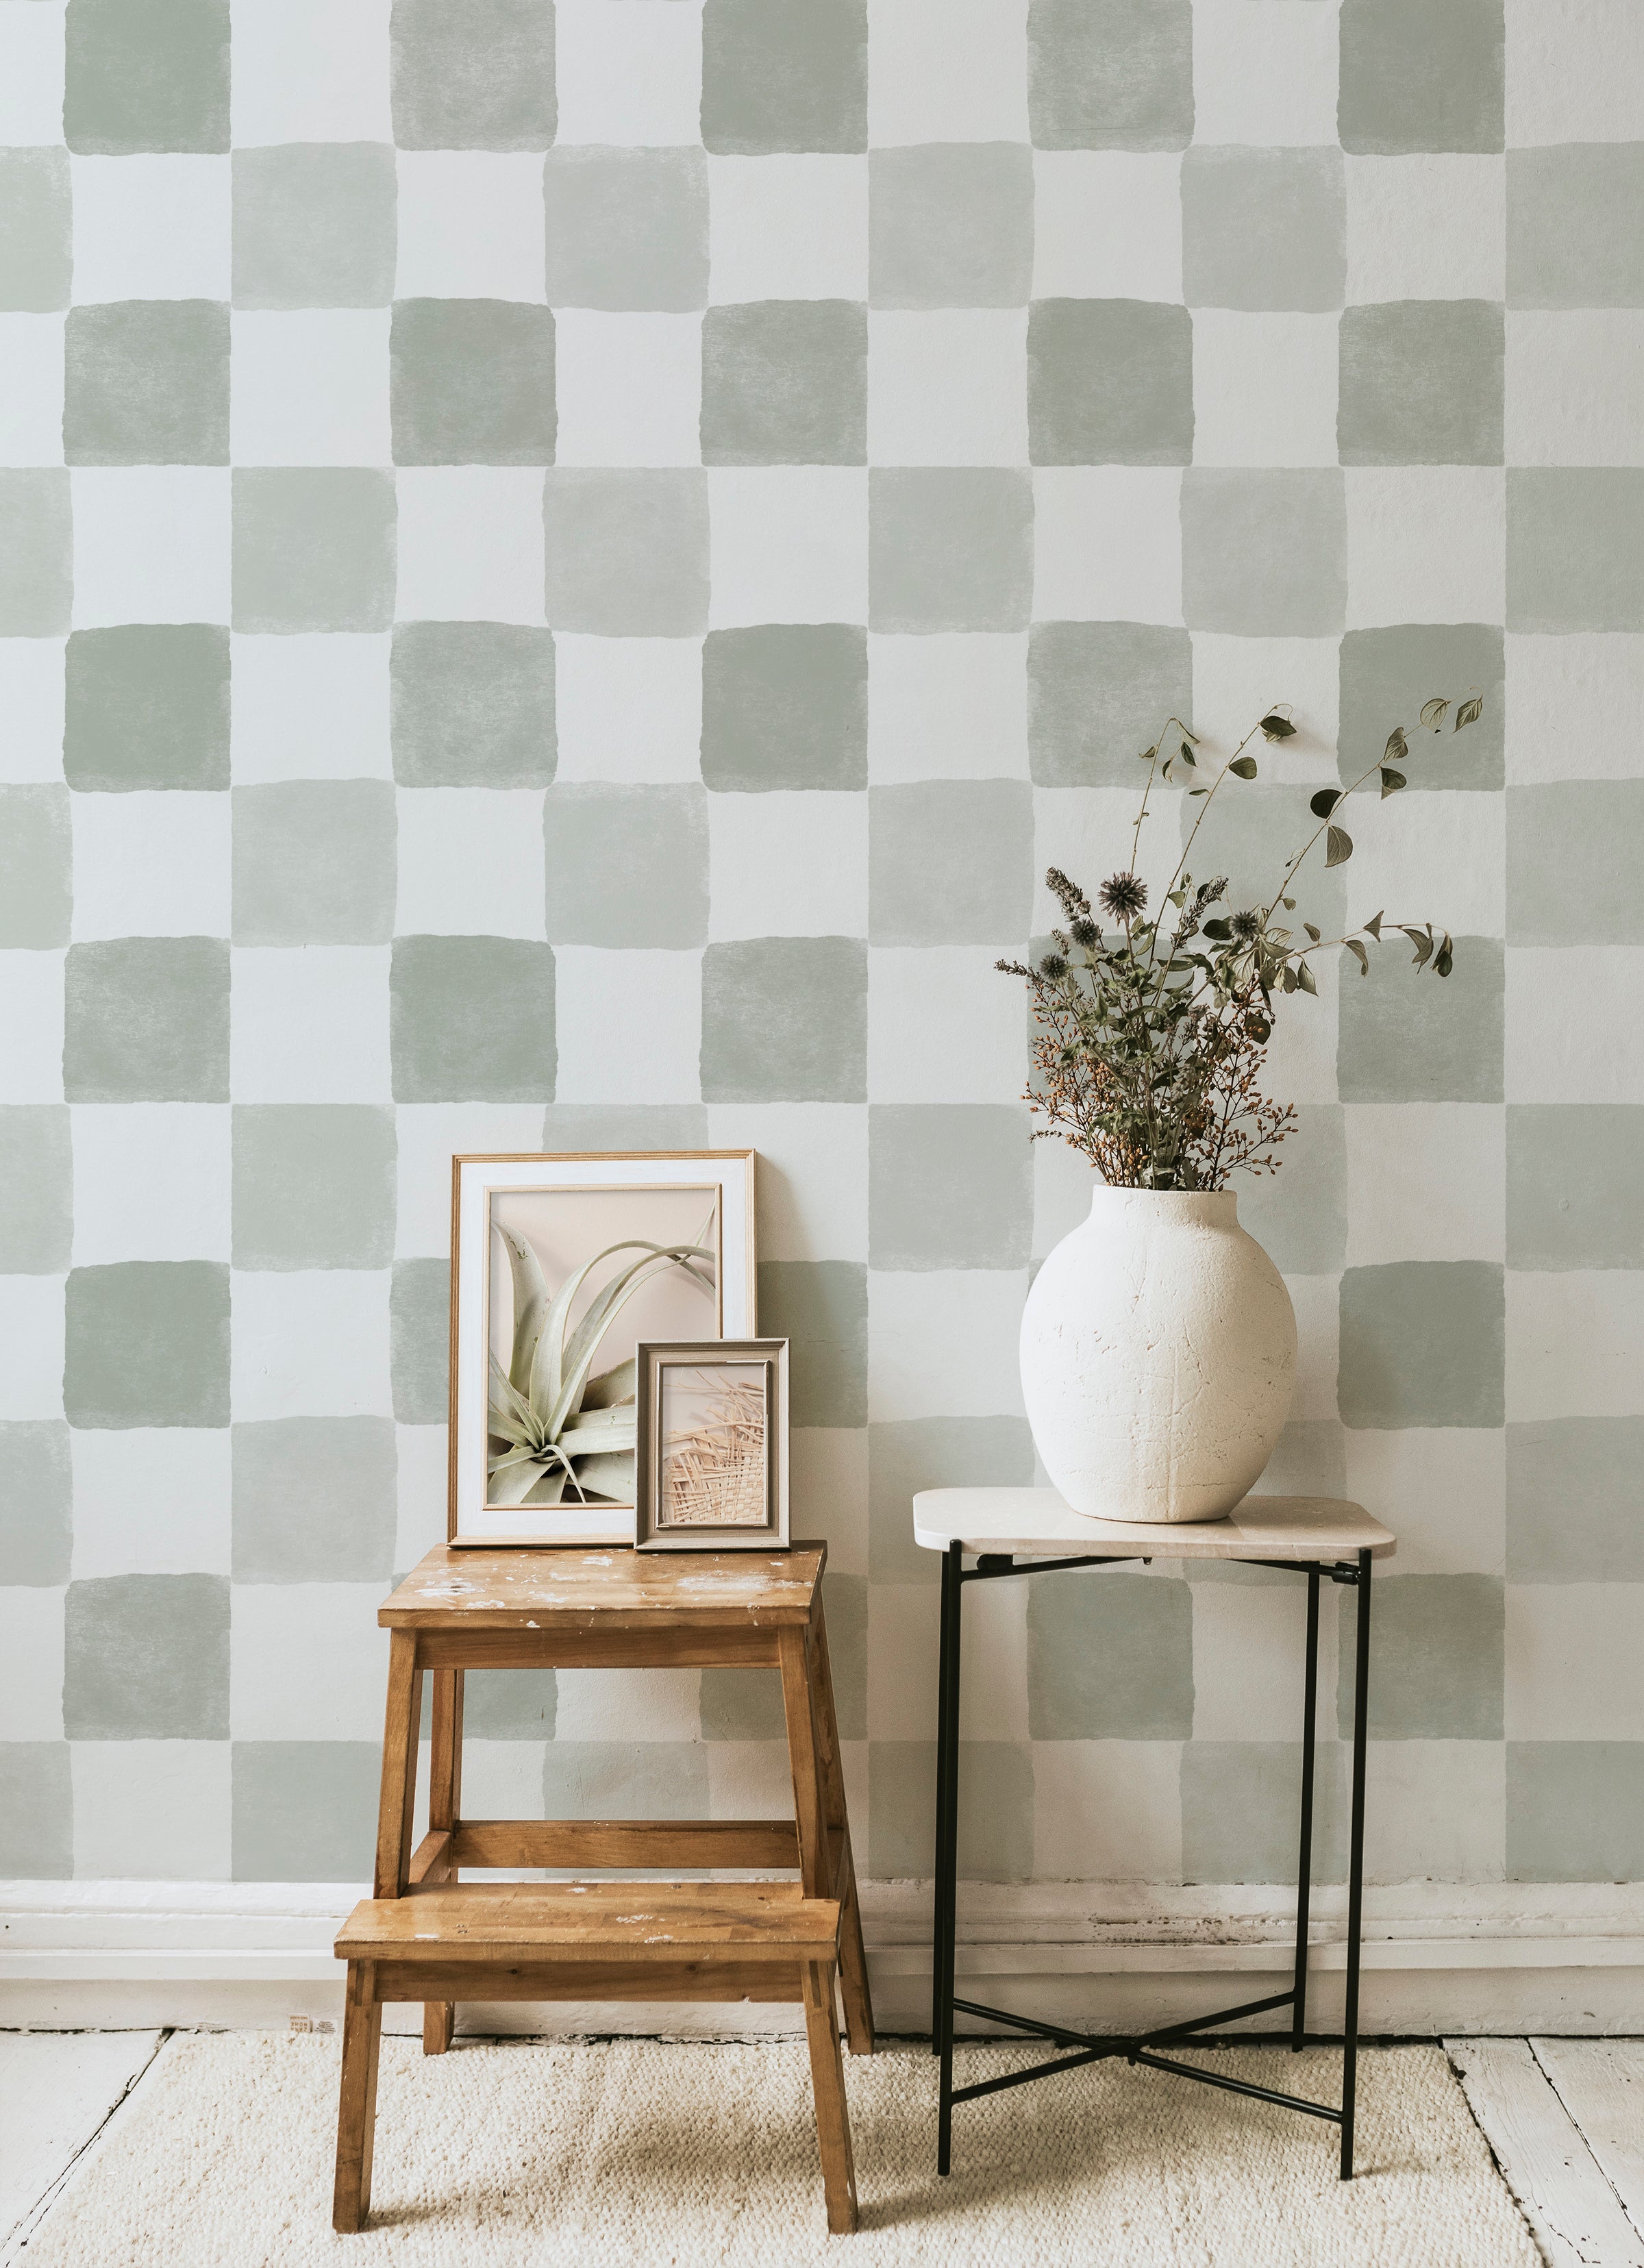 A stylish corner of a room showcasing the Clémence Wallpaper - Olive, a seamless checkered pattern. A rustic wooden step stool holds framed artwork and a large vase with dried flowers, enhancing the wallpaper's soft olive hues and handmade aesthetic.